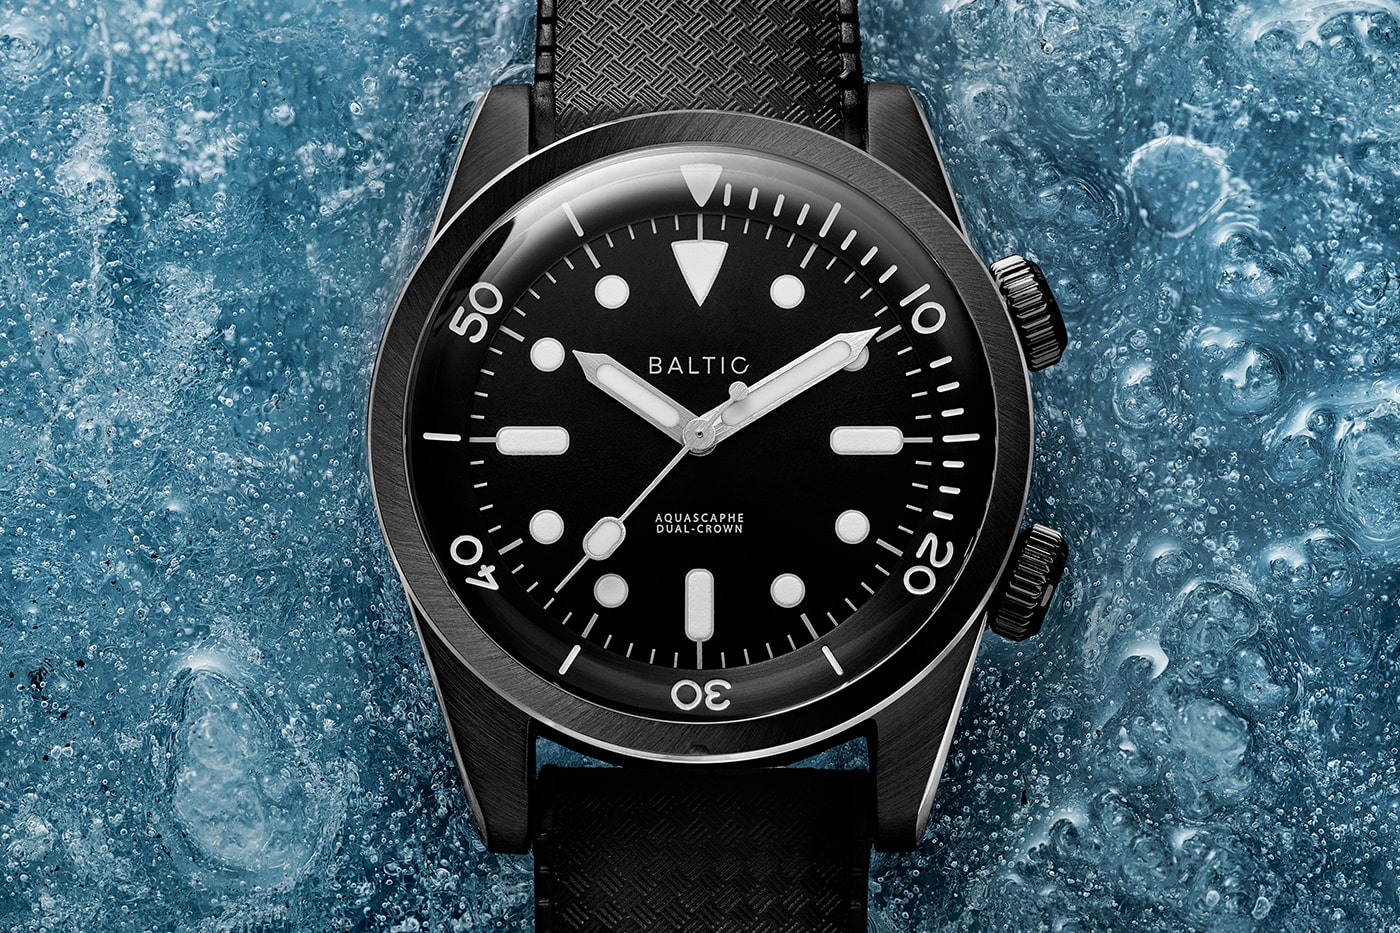 Baltic AQUASCAPHE Dual-crown dive compressor watch french dive watch france ice dual-crown miyota automatic watches 